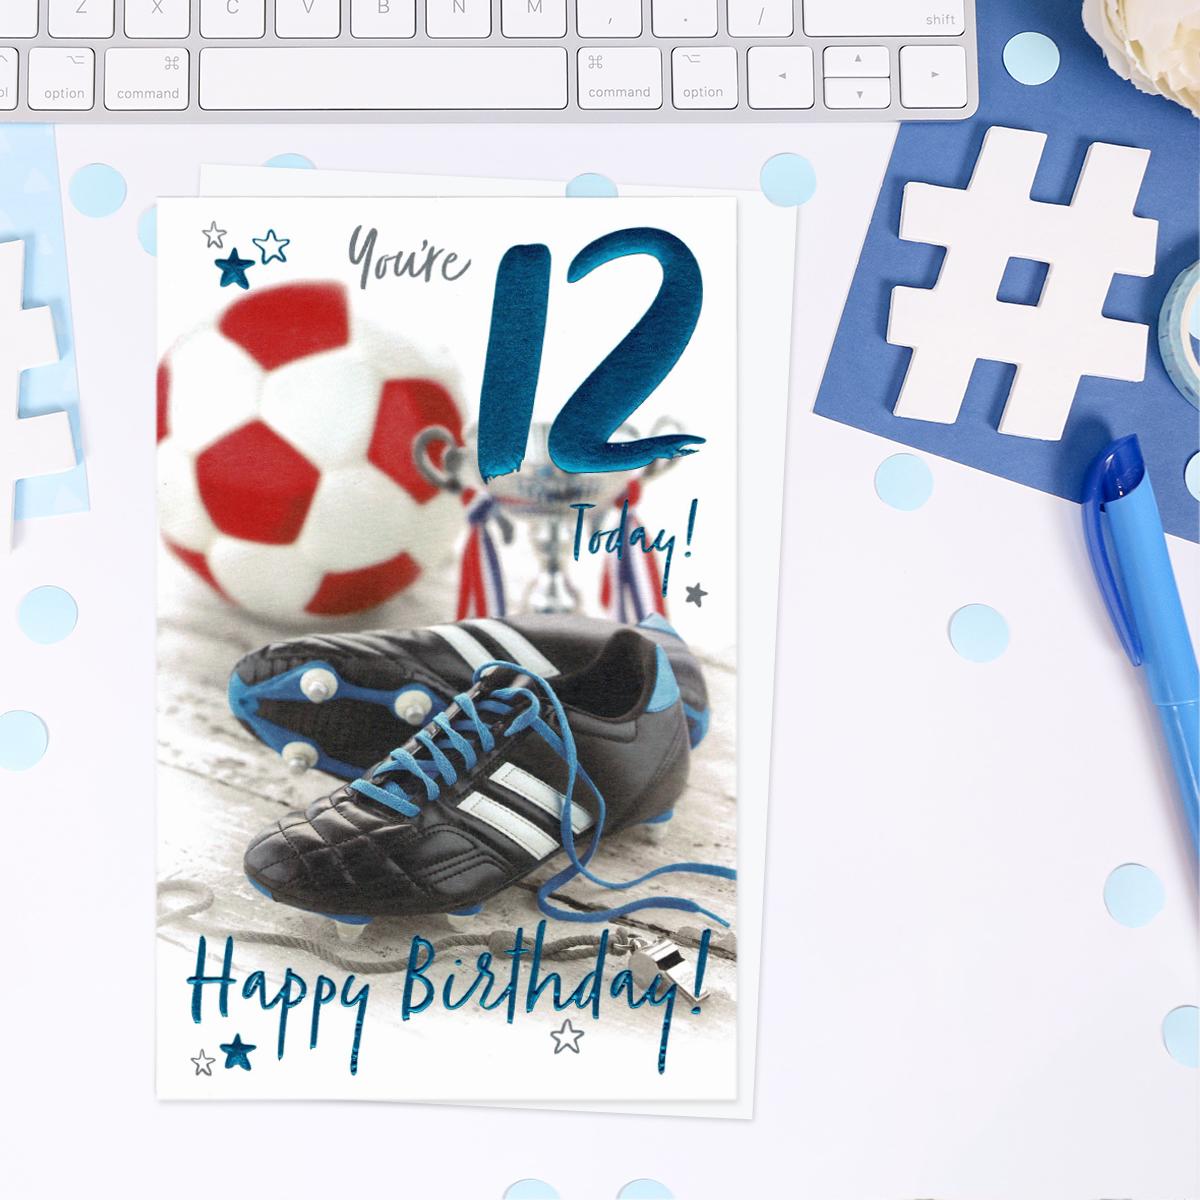 You're 12 Today Happy Birthday - Football Boots Card Front Image